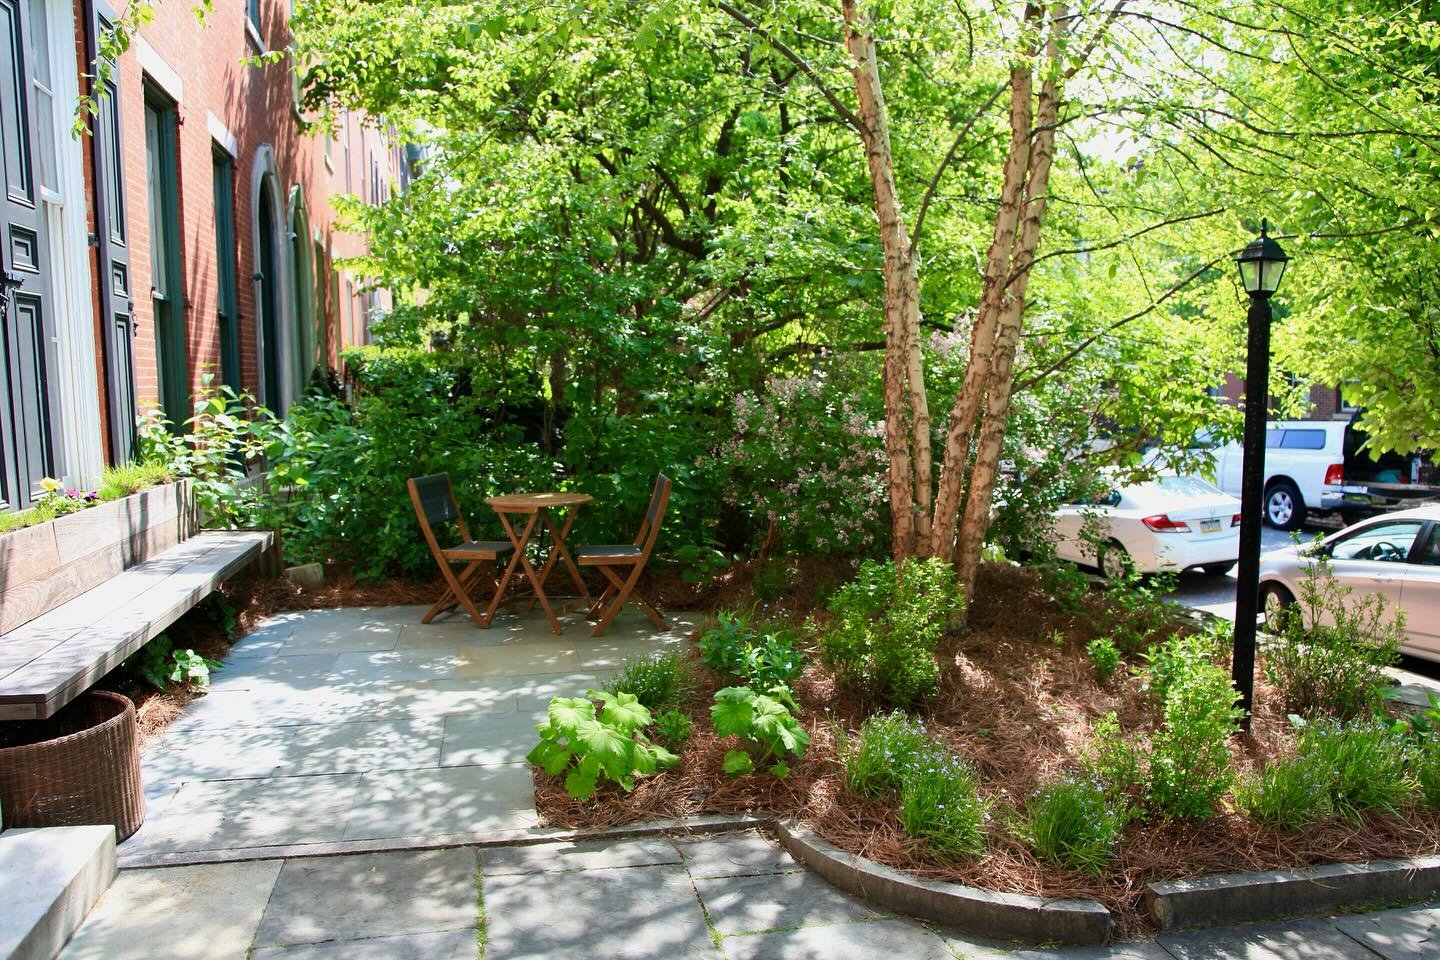 Gorgeous townhouse in historic neighborhood in need of a glow up? We got you!

Philadelphia&rsquo;s Spring Garden District dates back to the 1800&rsquo;s and its tree lined streets (some still with the original brick sidewalk like this one&hellip;) f